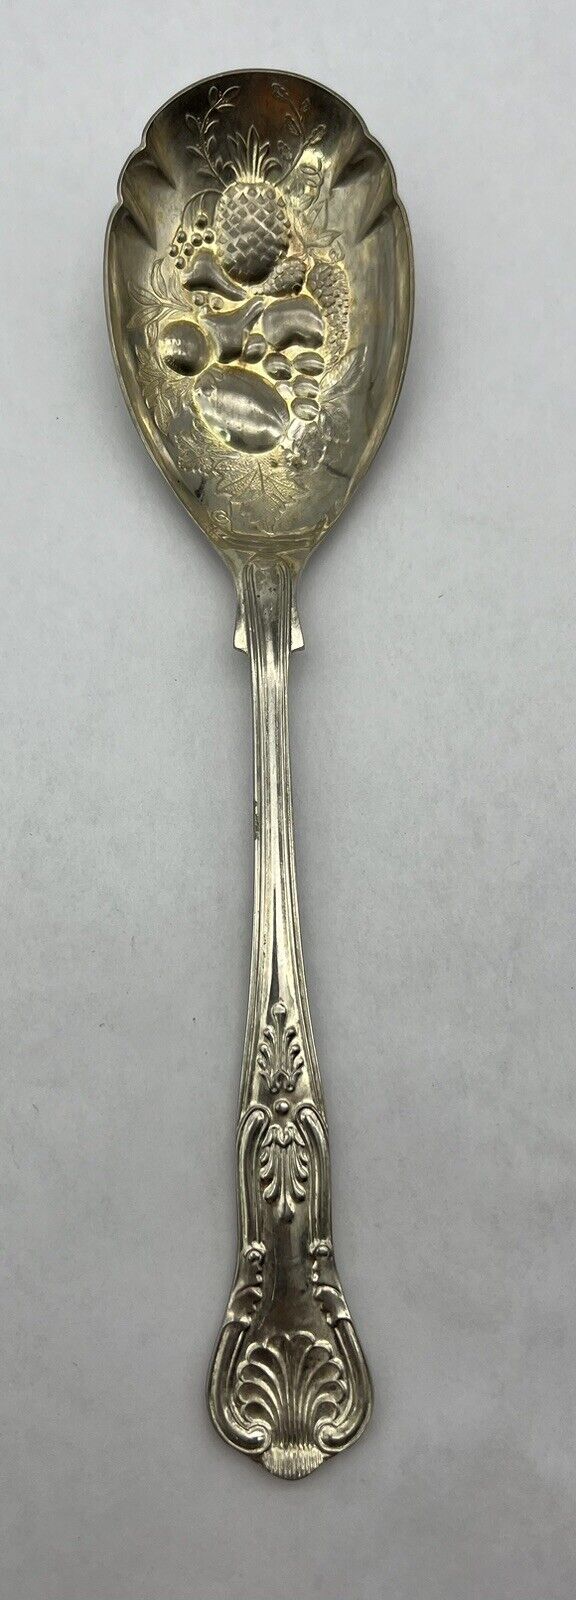 Vintage EPNS A1 Sheffield England Ornate Serving Spoon Fruits & Nuts Silverplate